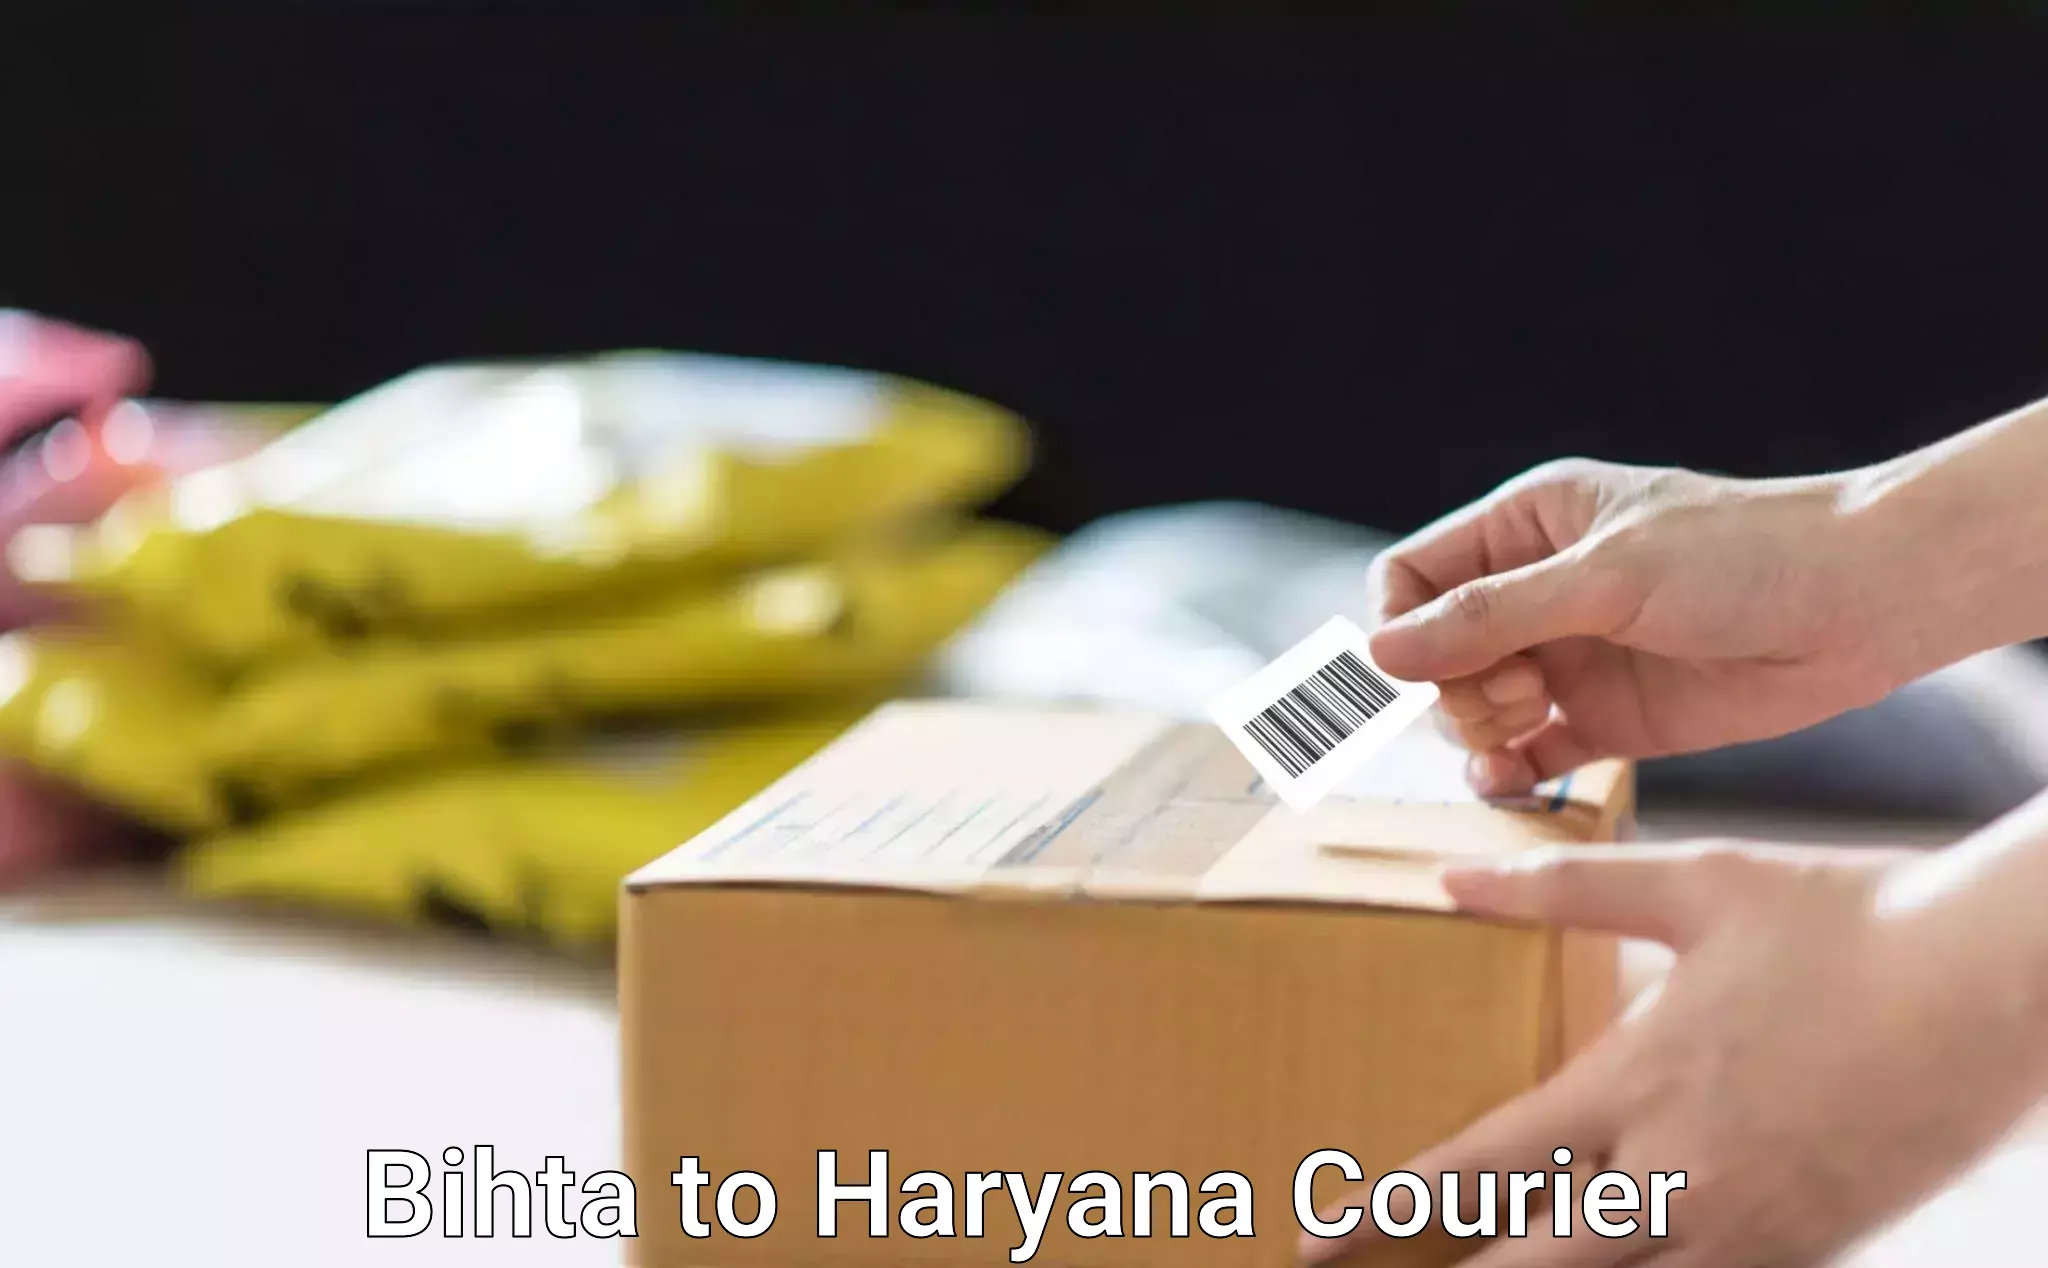 Moving and packing experts Bihta to Haryana